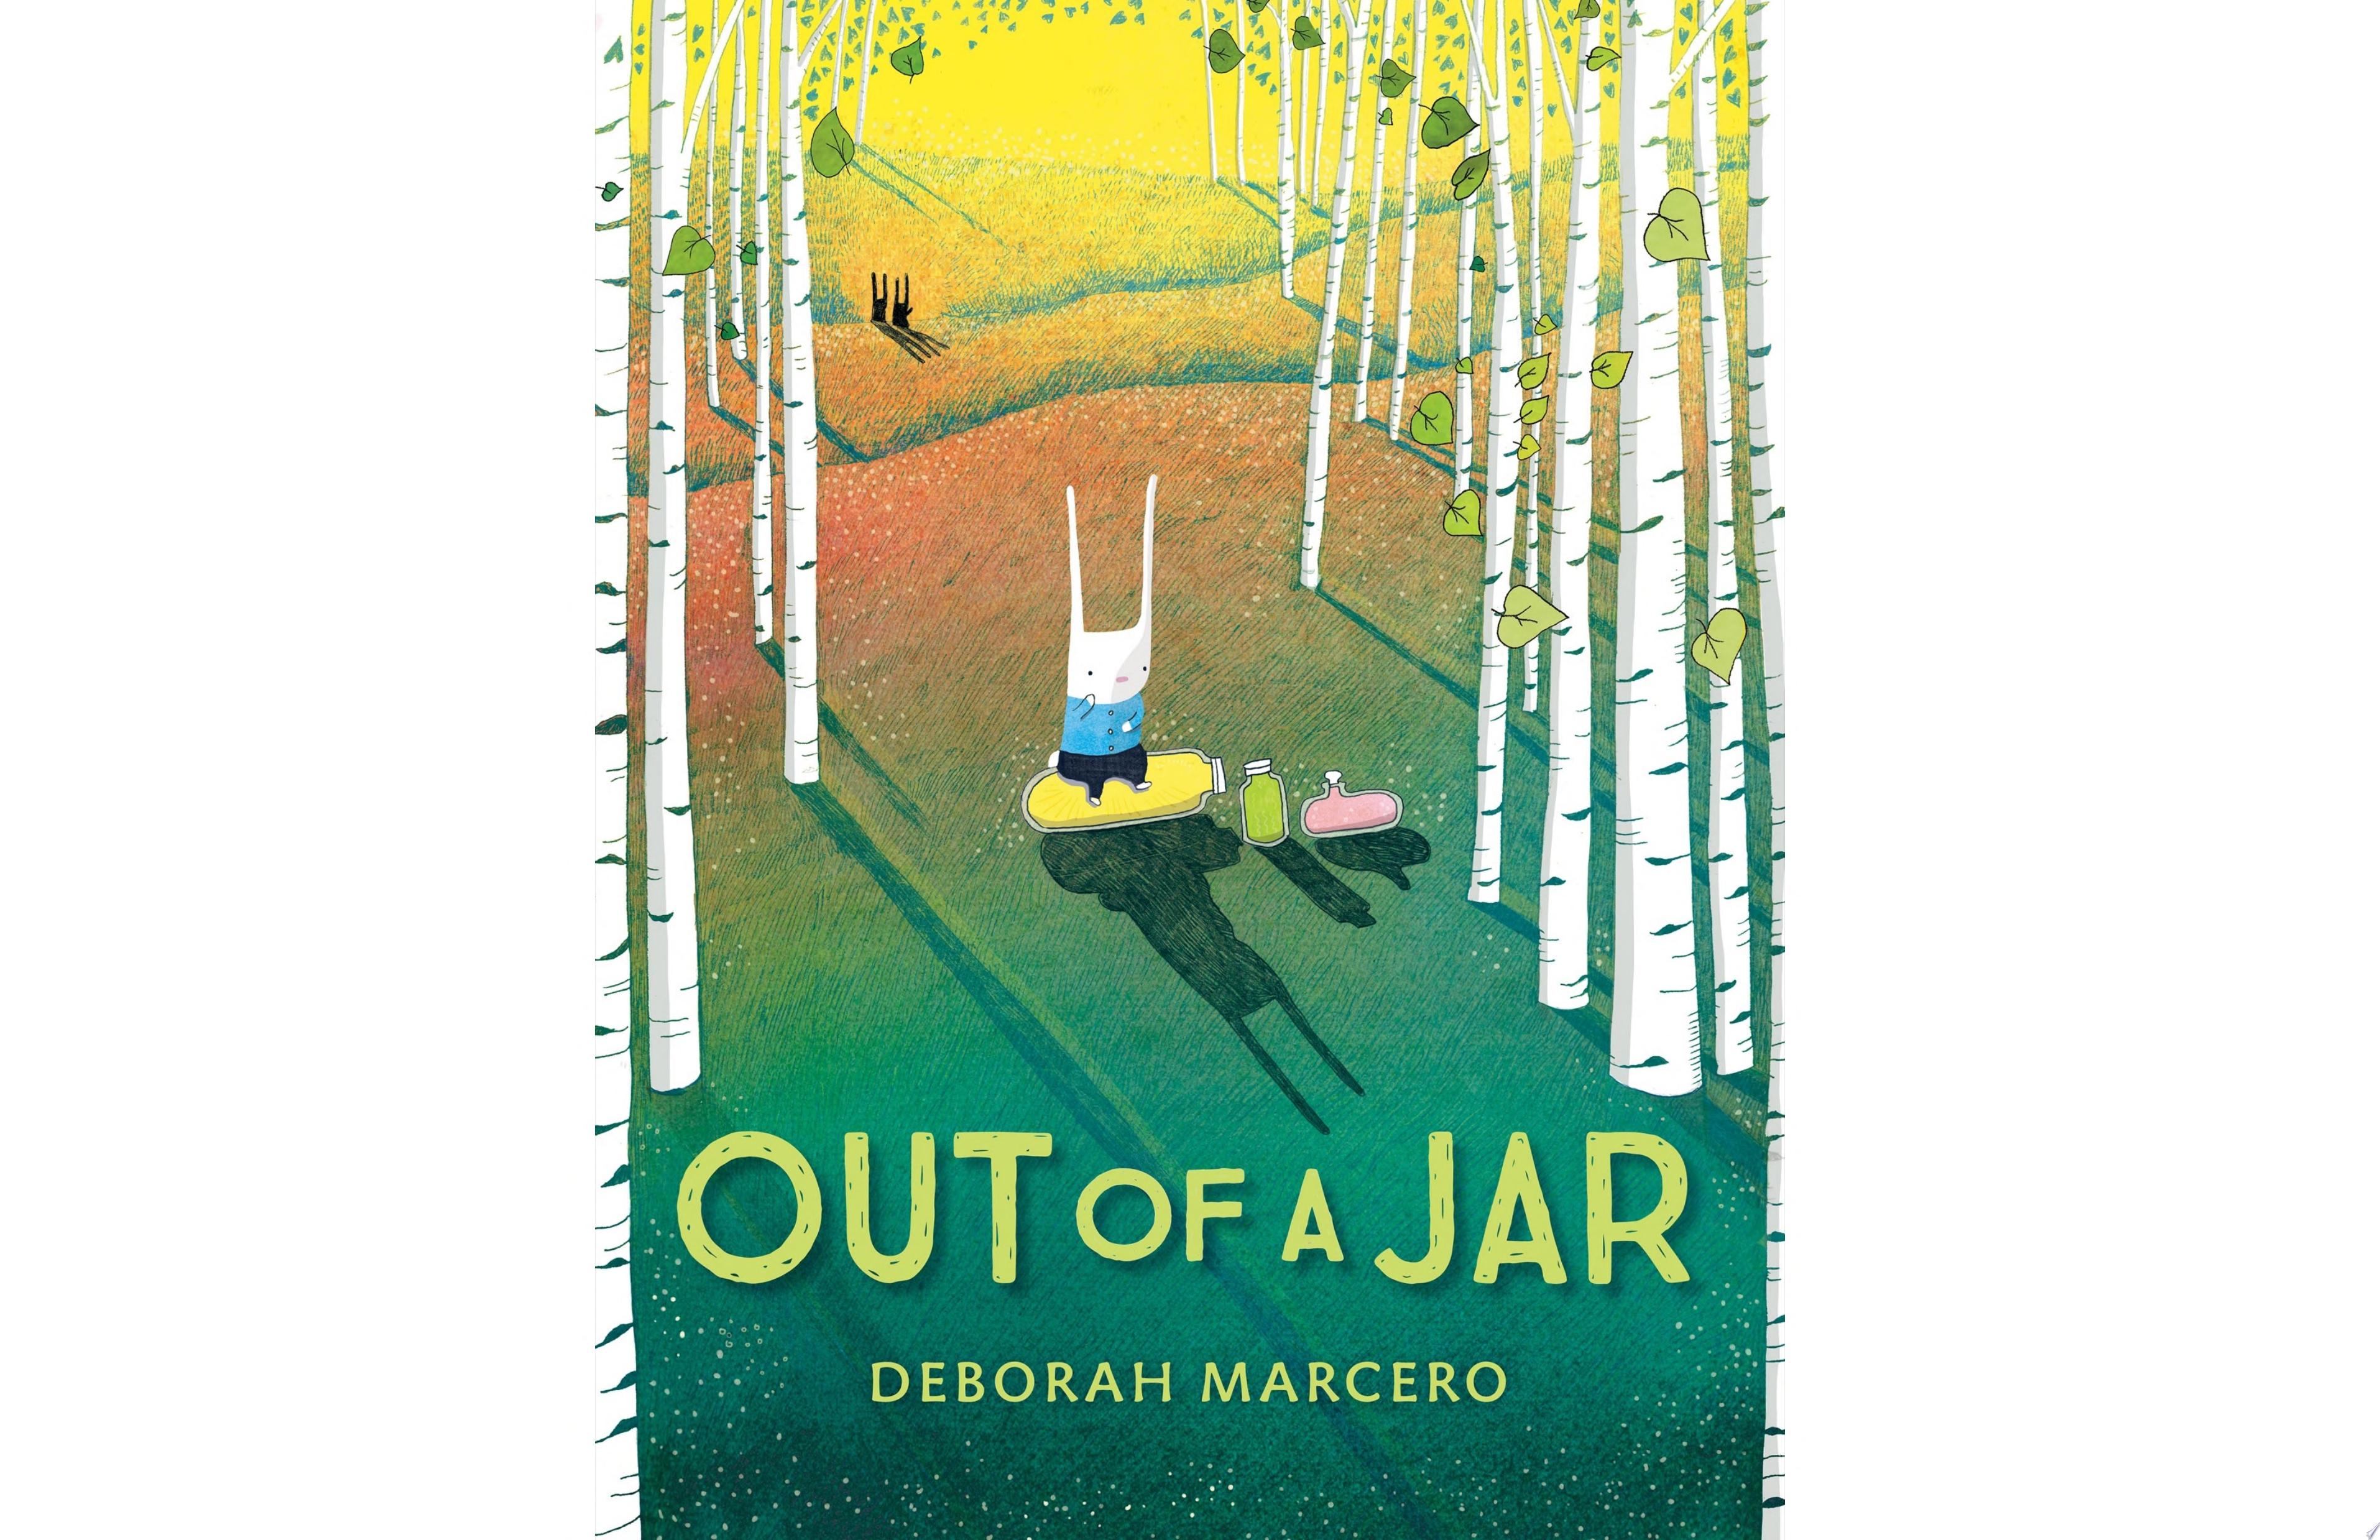 Image for "Out of a Jar"